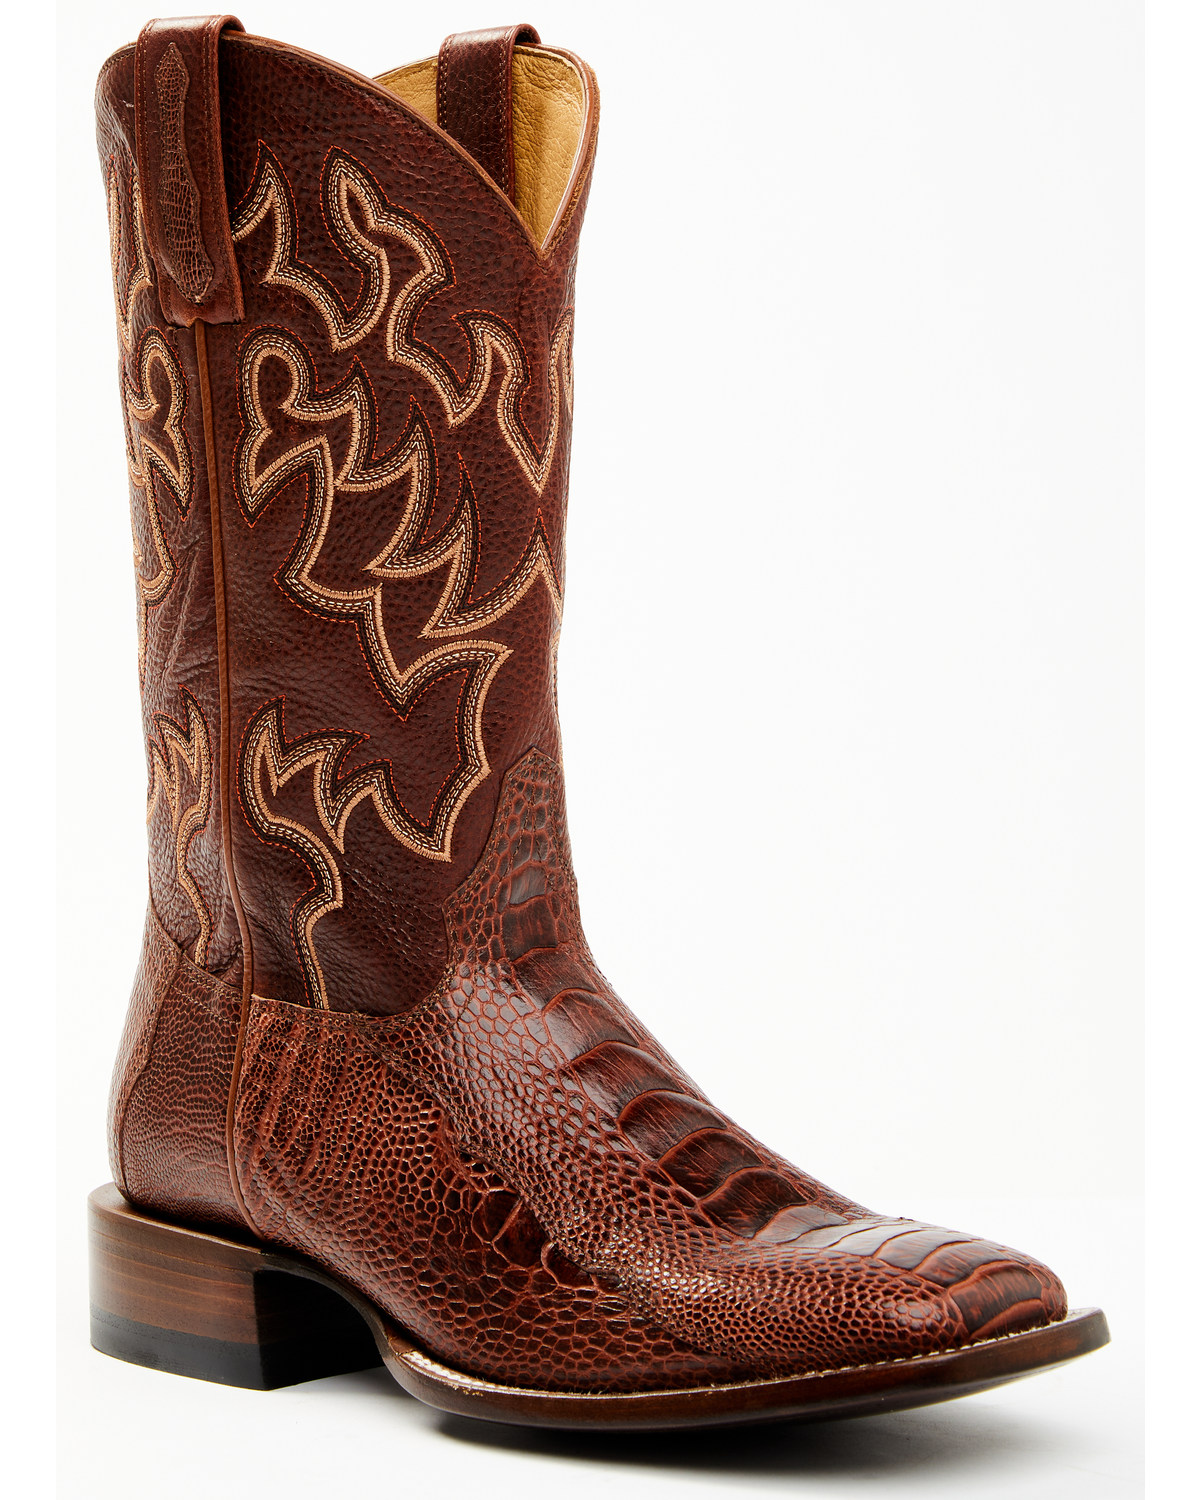 Cody James Men's Brandy Ostrich Leg Exotic Western Boots - Broad Square Toe